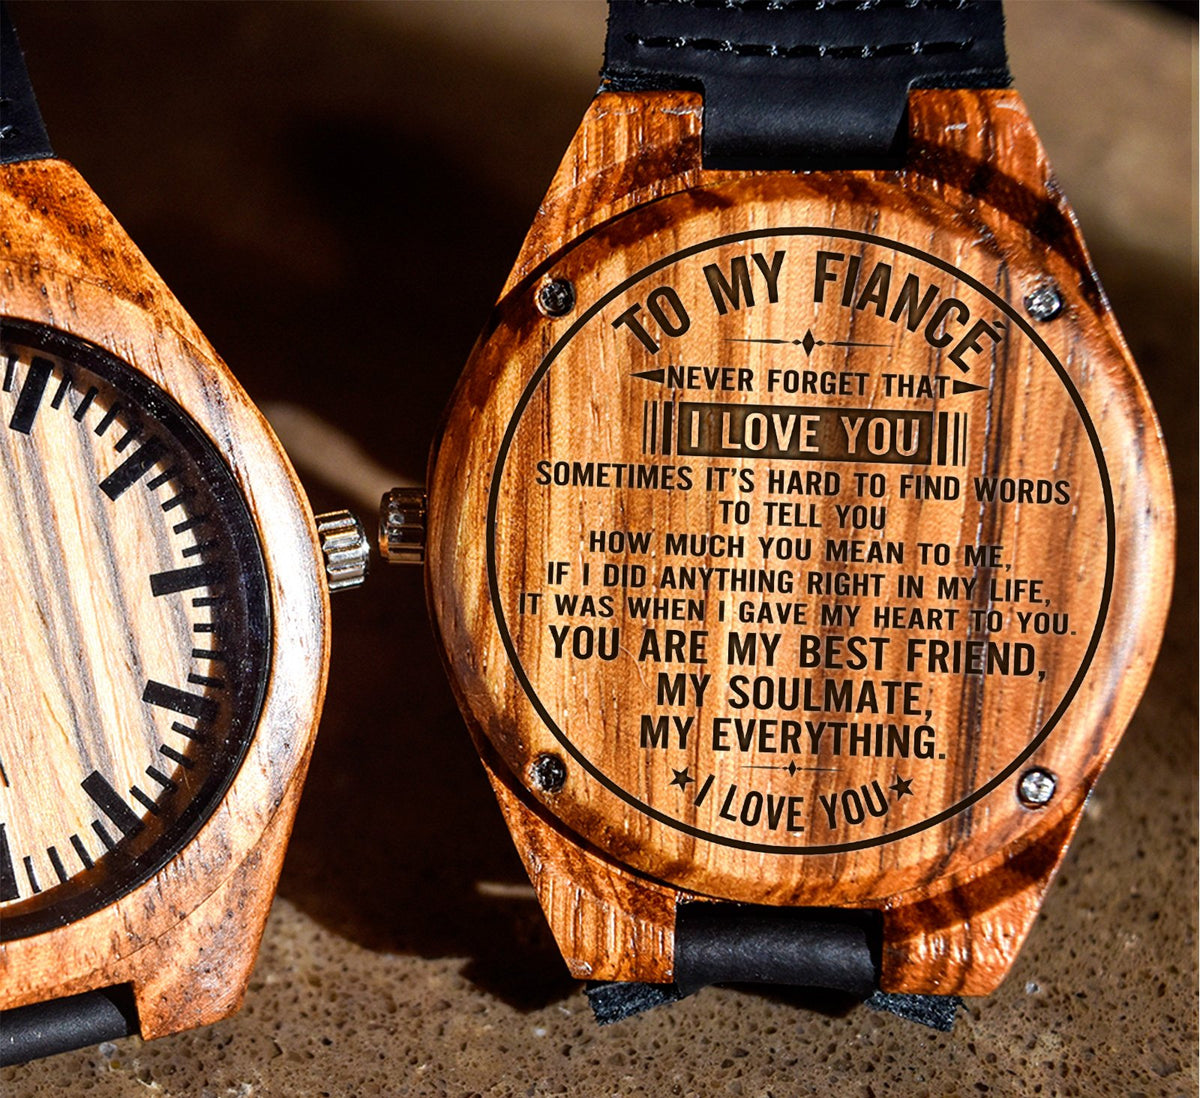 To My Fiance - Never Forget That I LOVE YOU - Wooden Watch